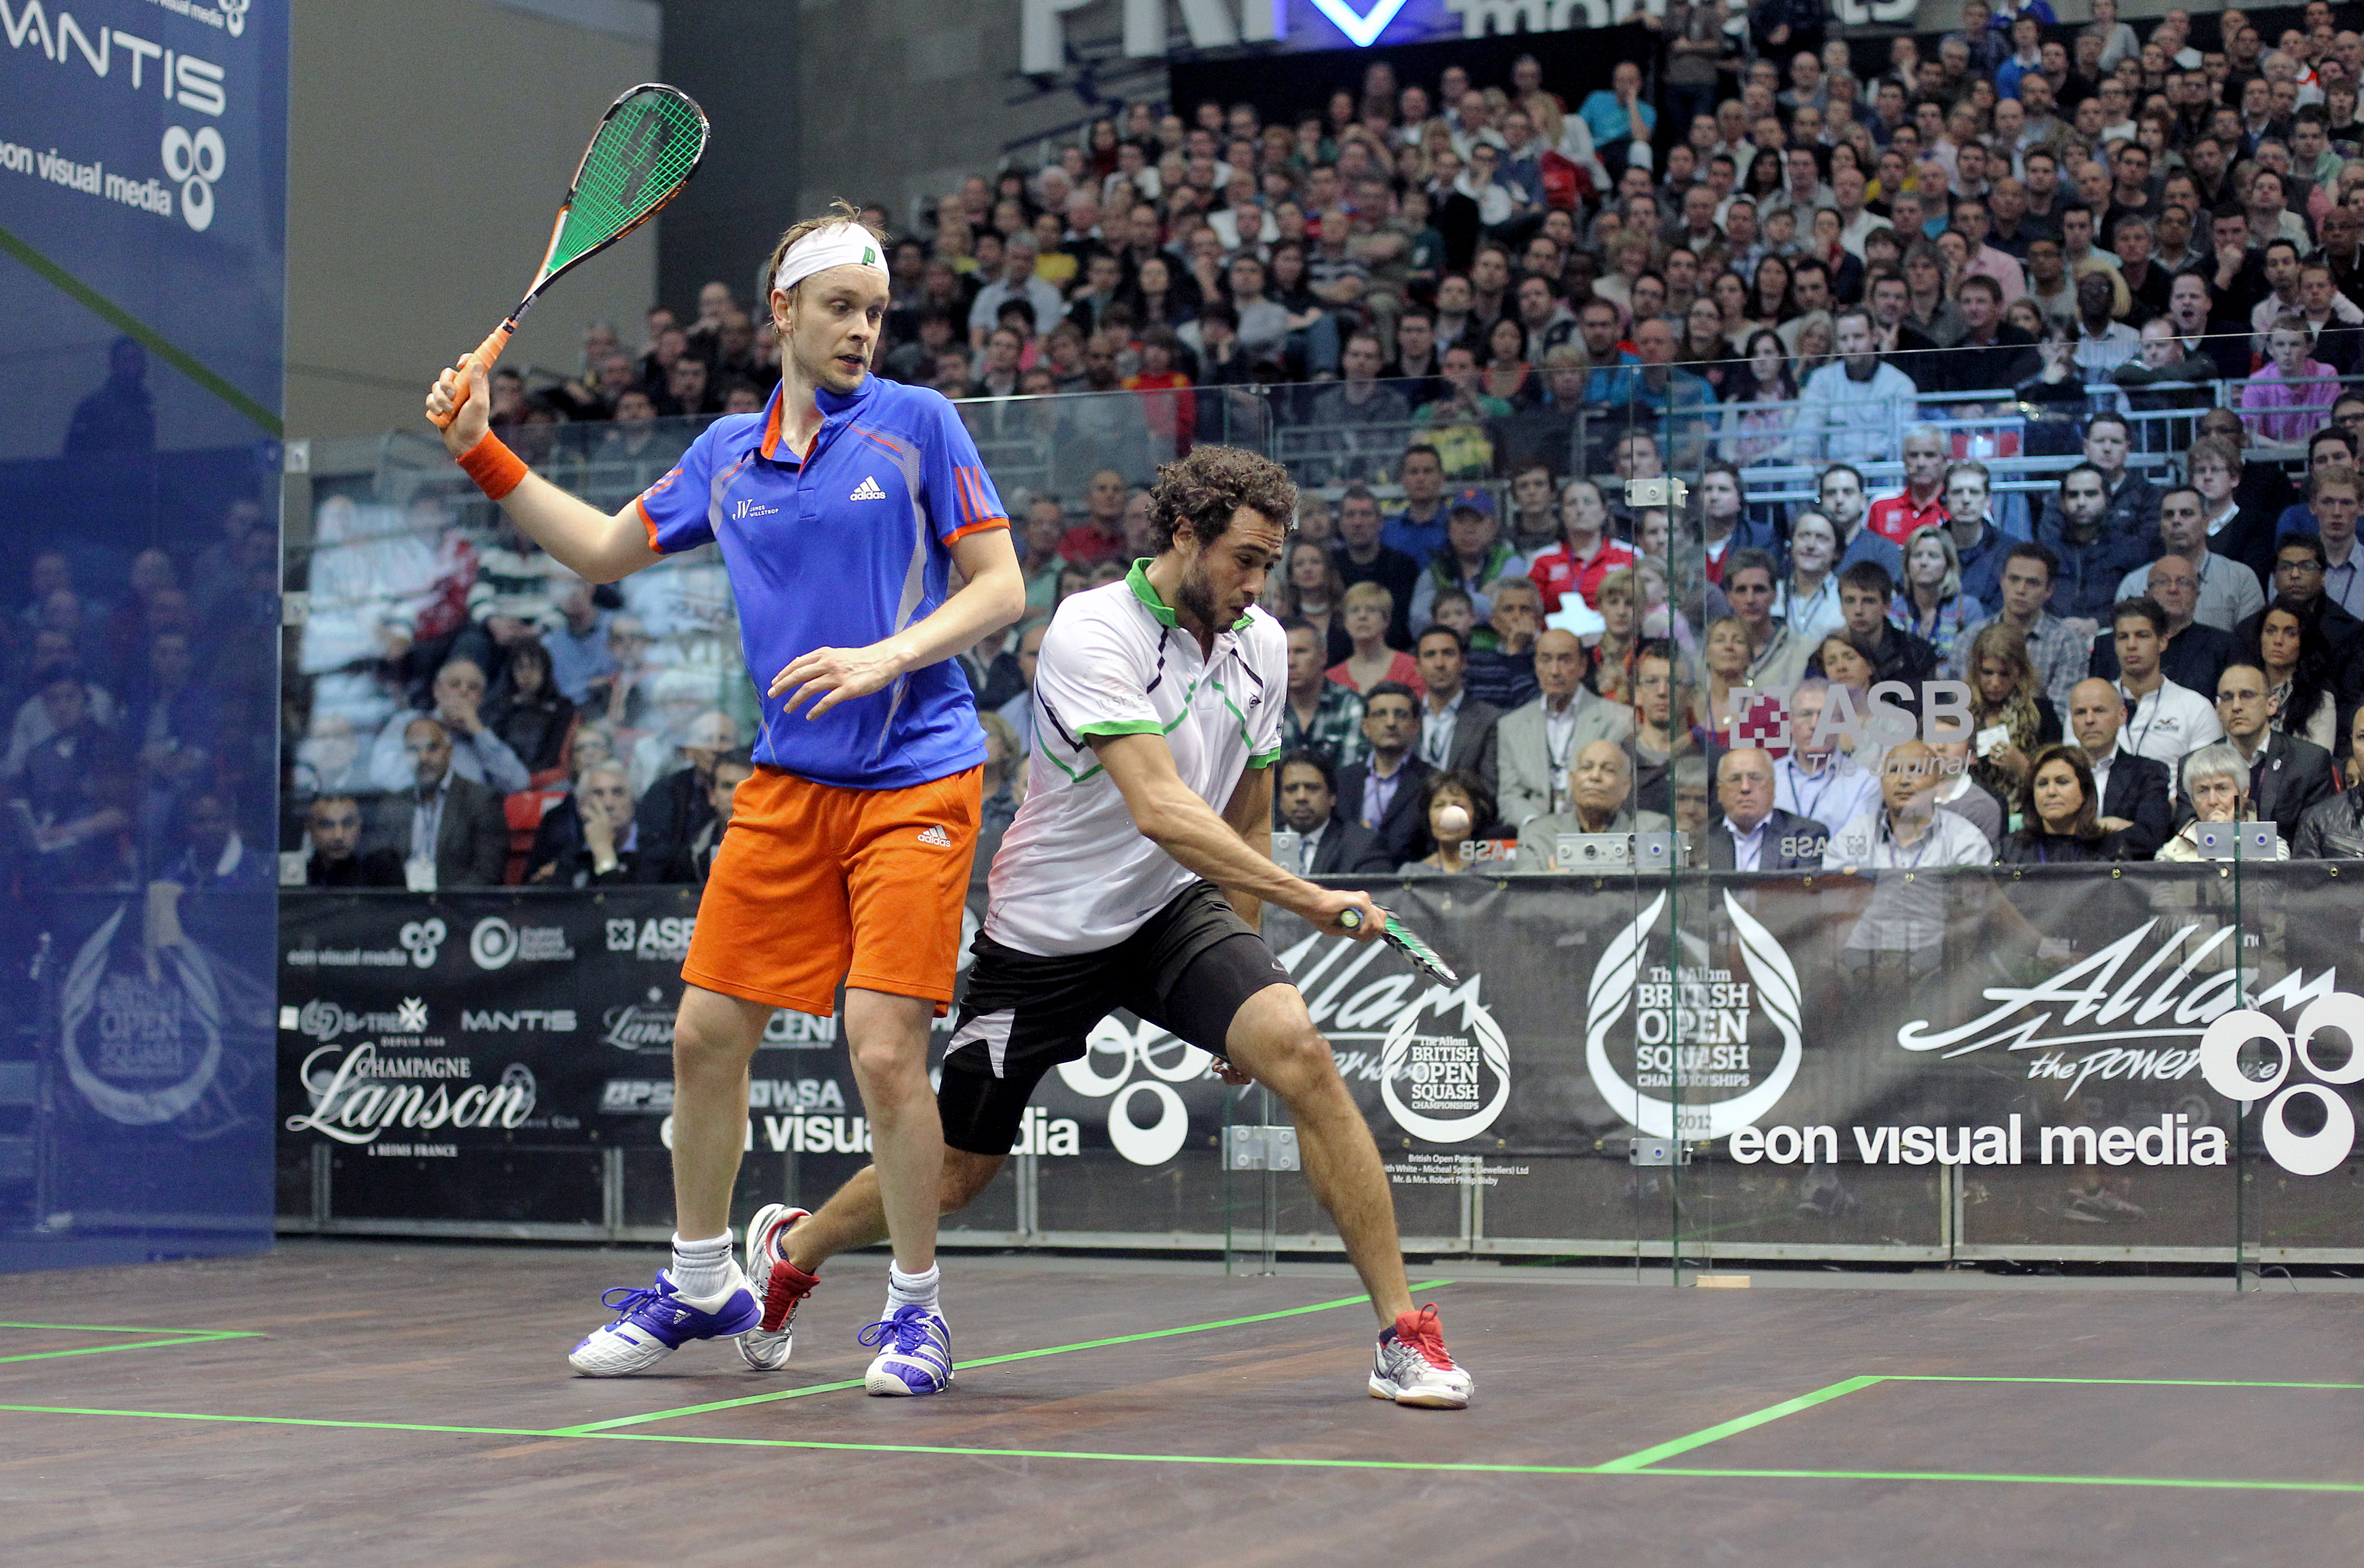 The nature of squash is such that players cannot—and do not—insist on perfect freedom to play the ball. The compromise of playing balls despite some interference lends to the flow of the game.